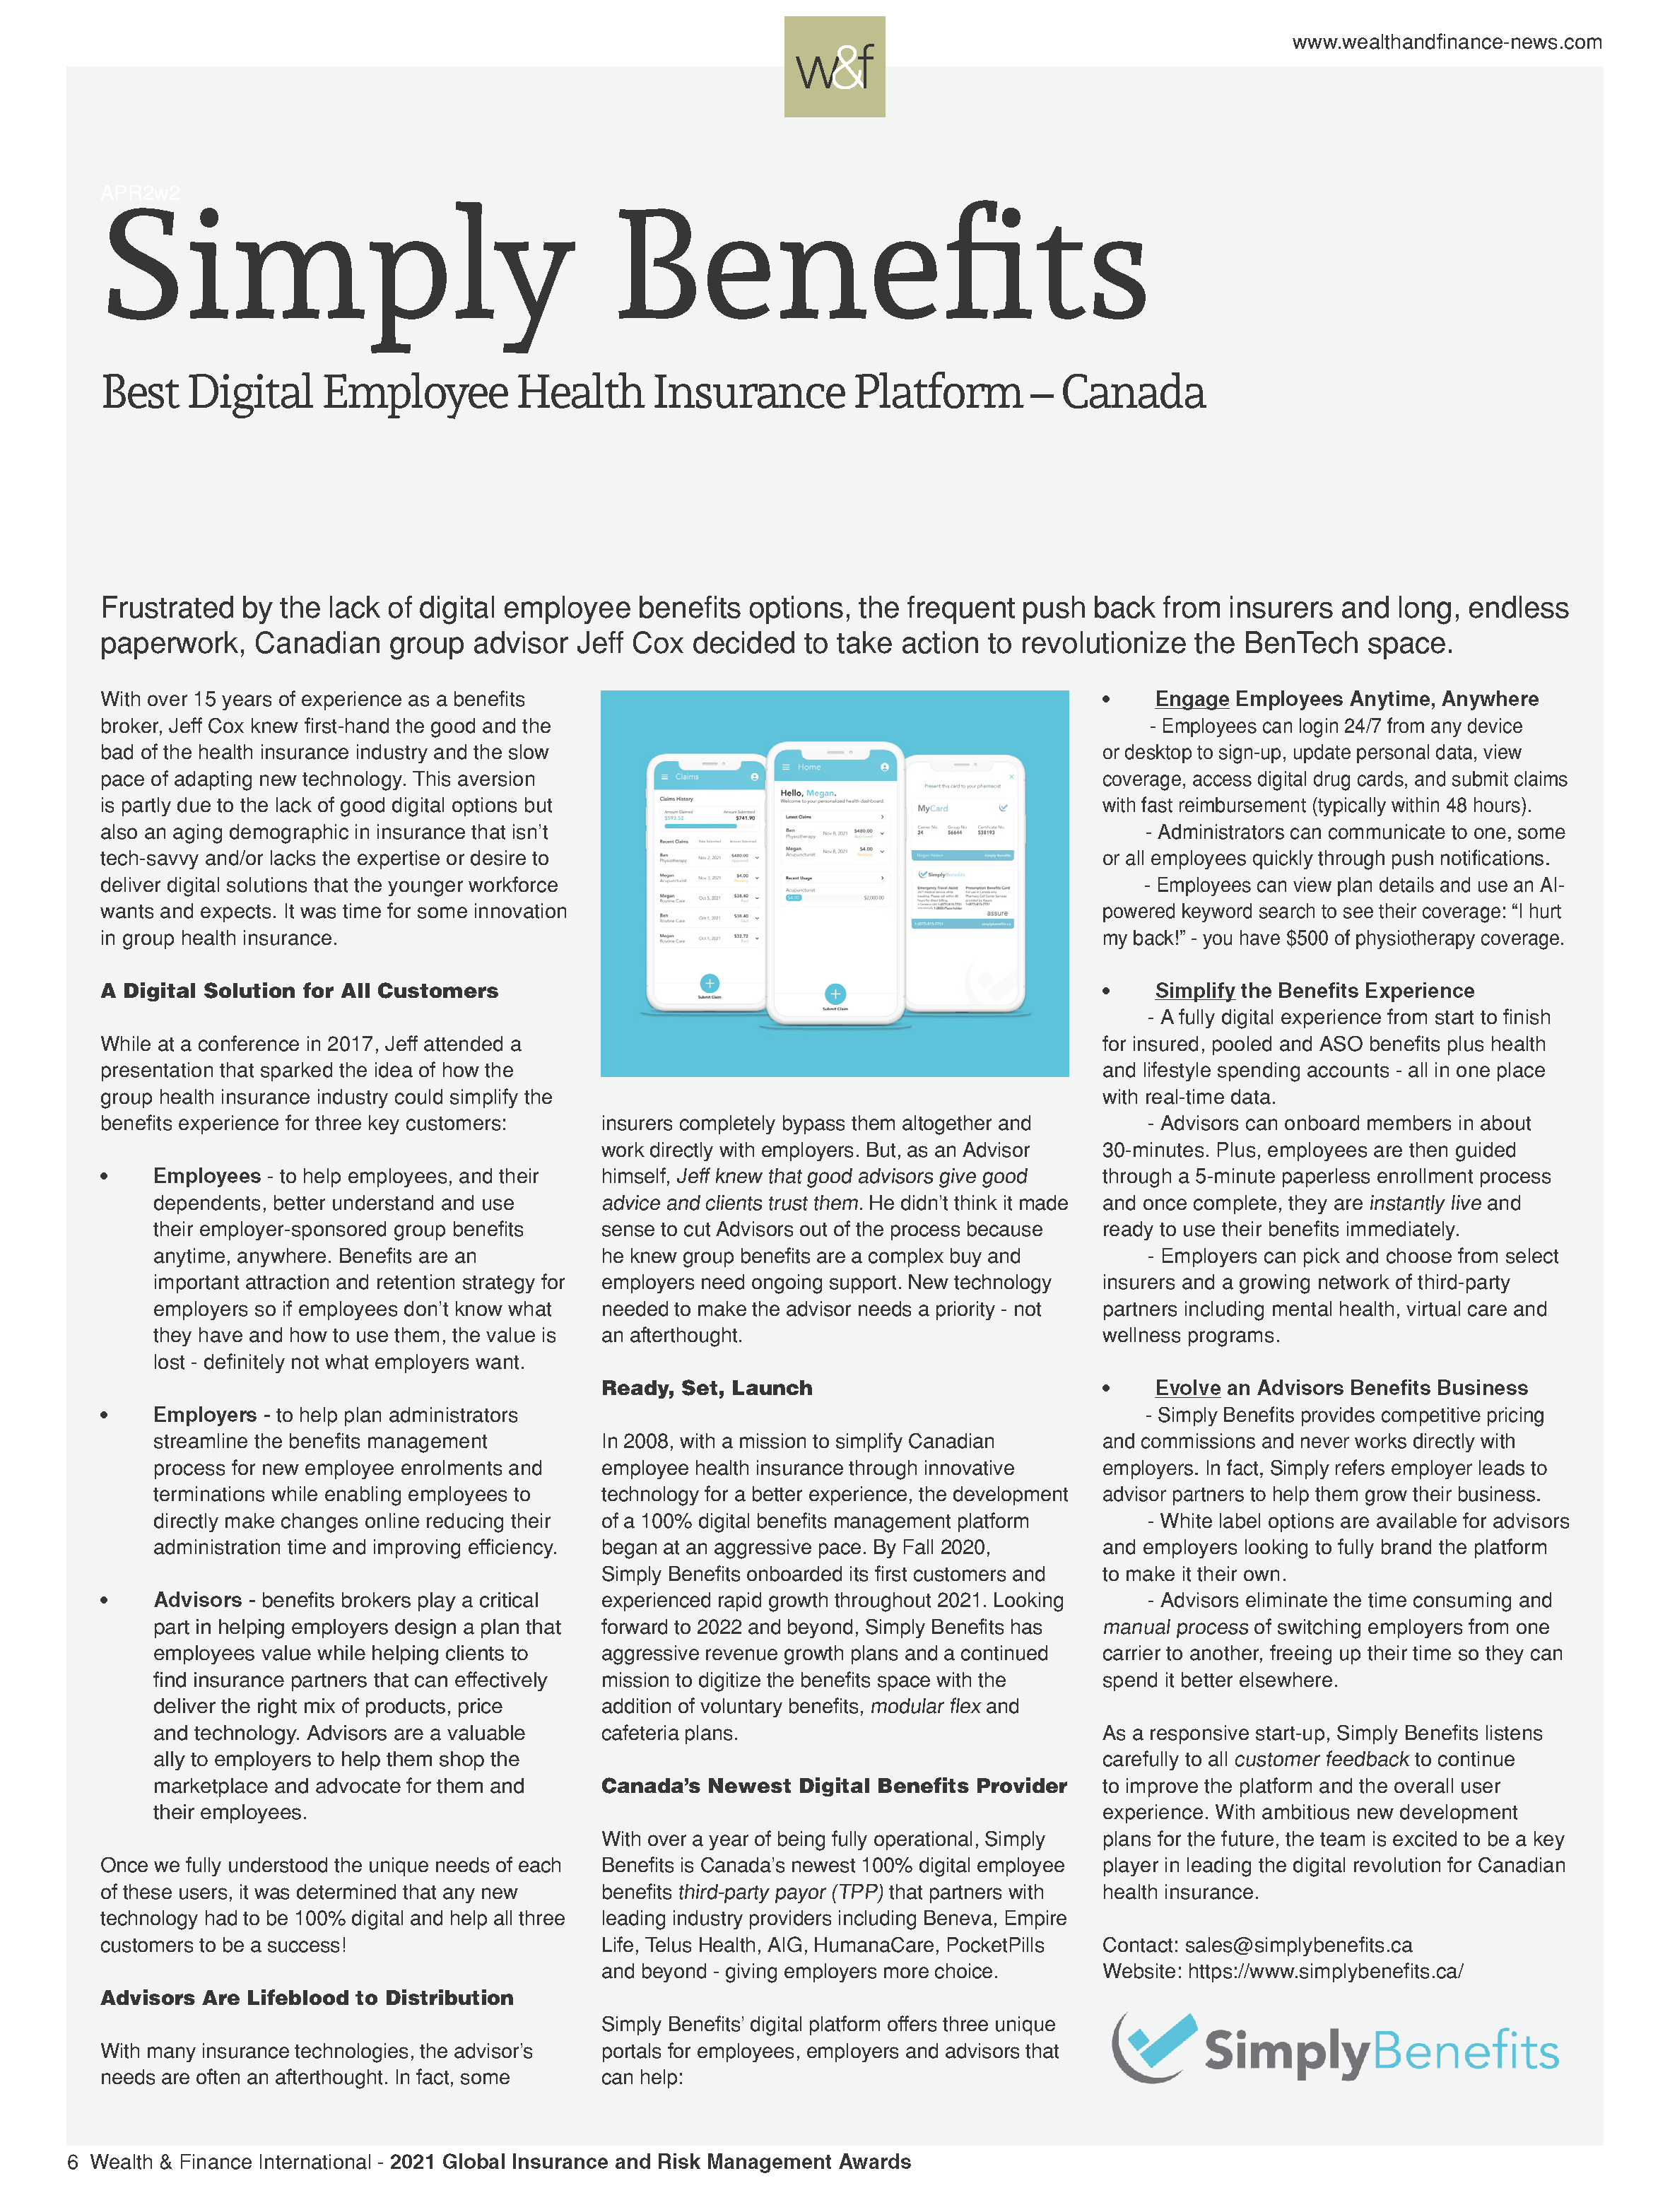 Simply Benefits Article_2021 Global Insurance and Risk Management Awards